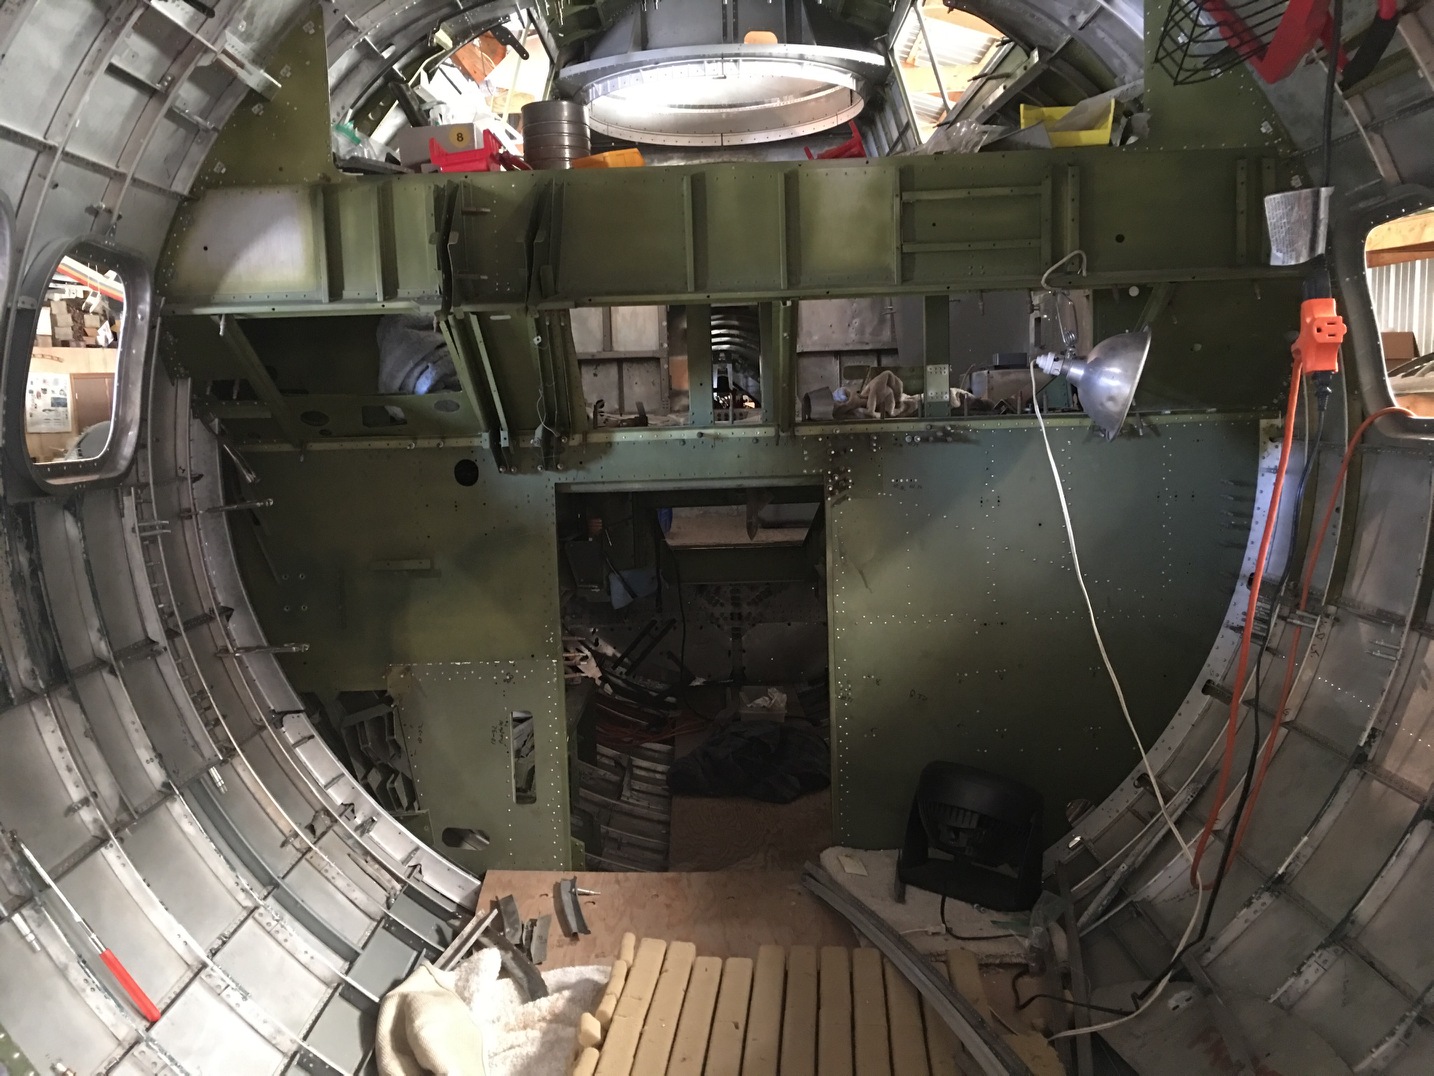 An interior view of Desert Rat's nose section looking back towards the cockpit. The small lower bulkhead opening is the entry point for the nose. It is a tight squeeze at the best of times, but imagine getting through that hole in a hurry while wearing a bulky fleece-lined flight suit. It's no surprise that crew members had a near impossible task exiting this area during an emergency! (photo via Vintage Aviation Museum) 